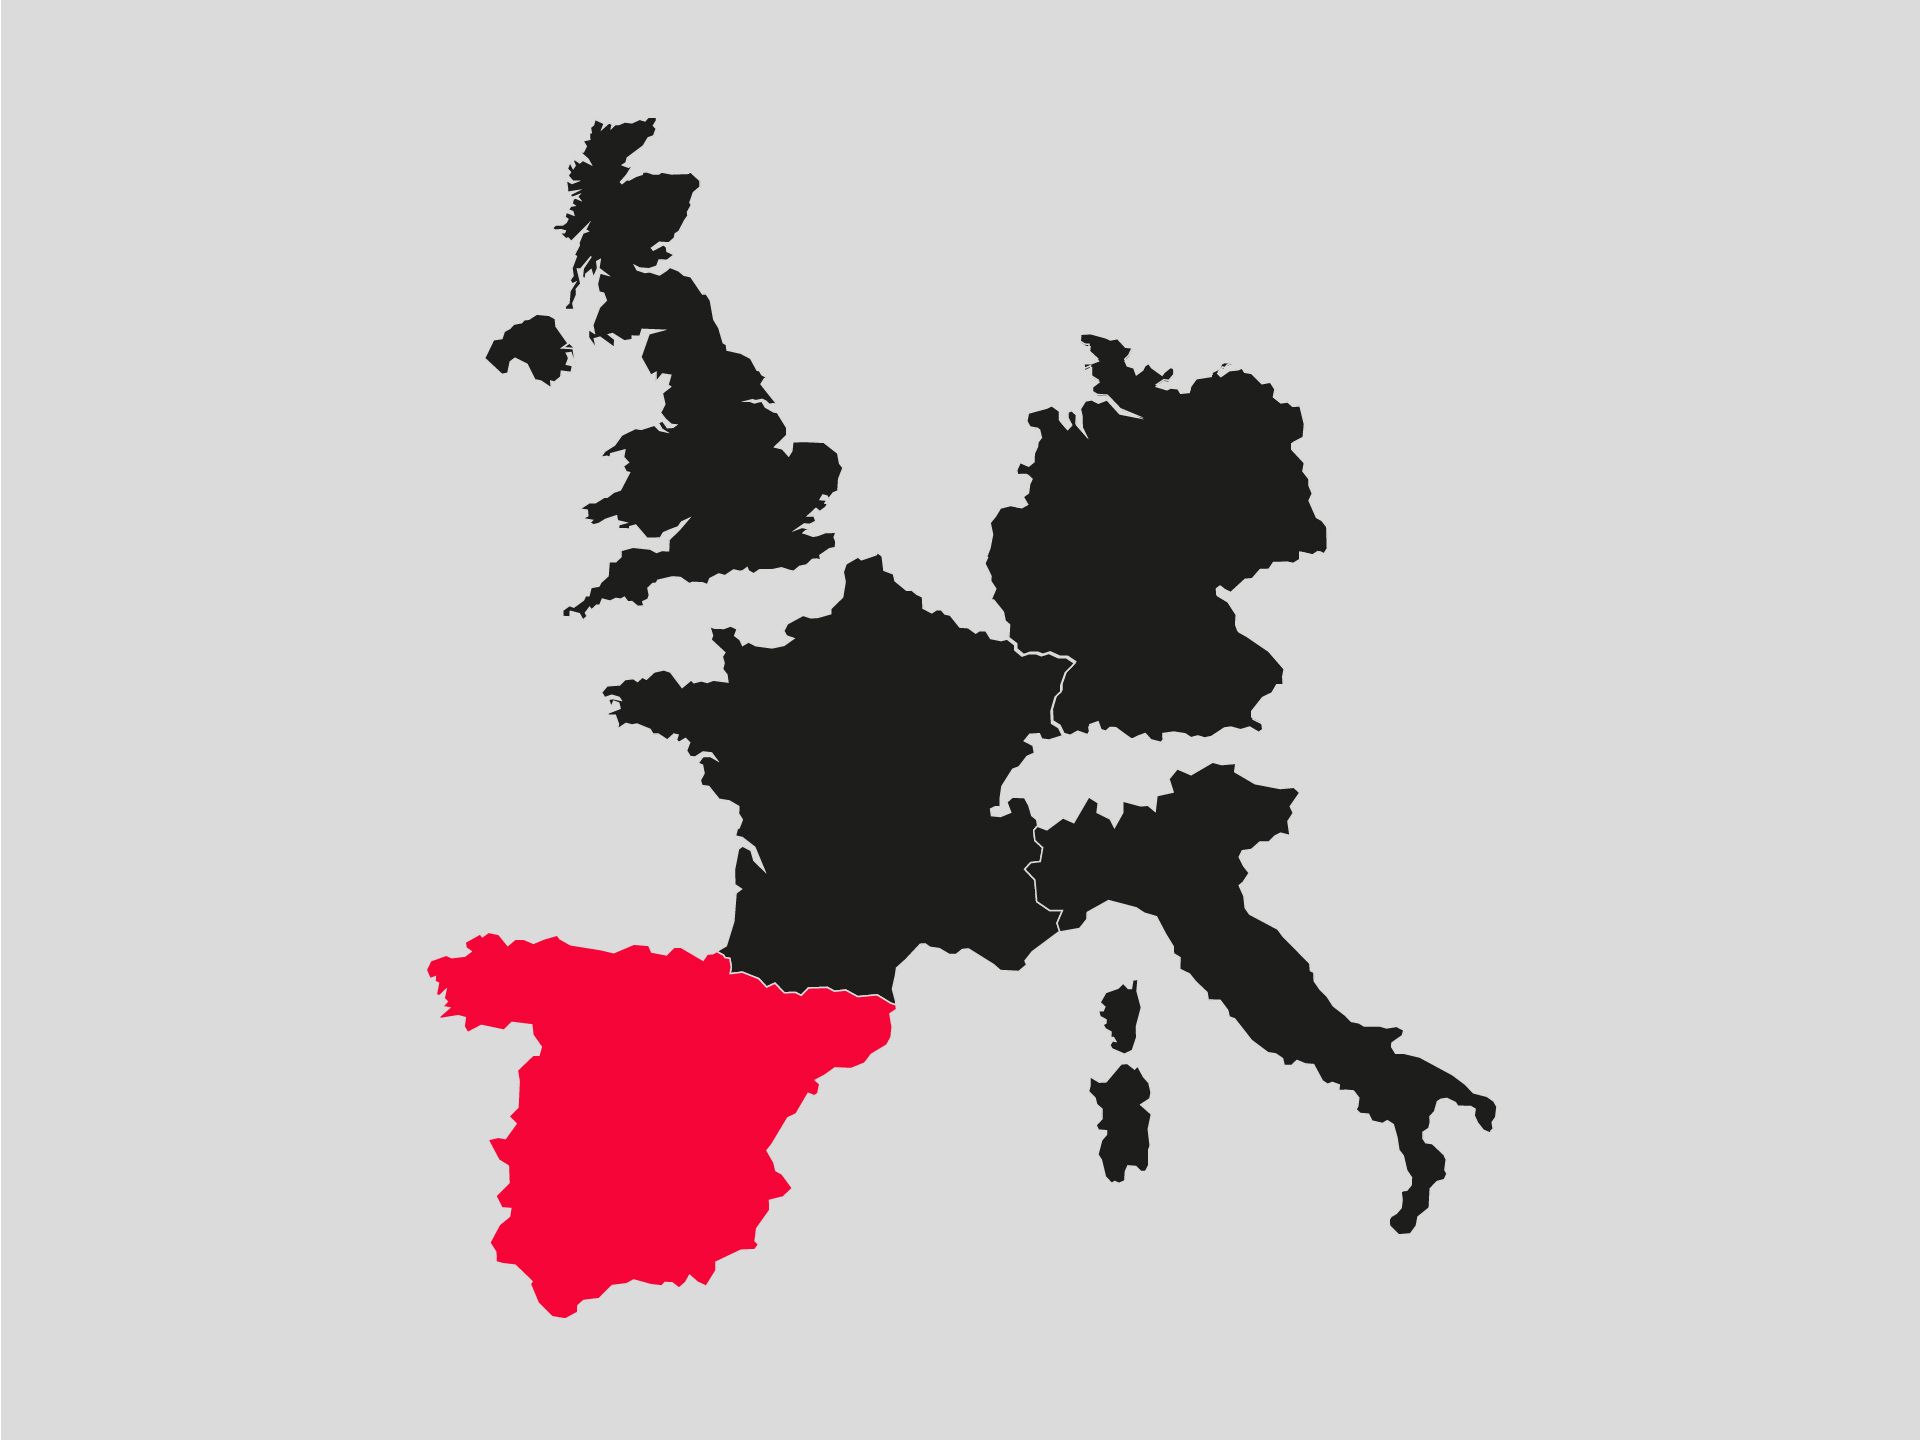 The graphic shows Europe with Spain highlighted in color.